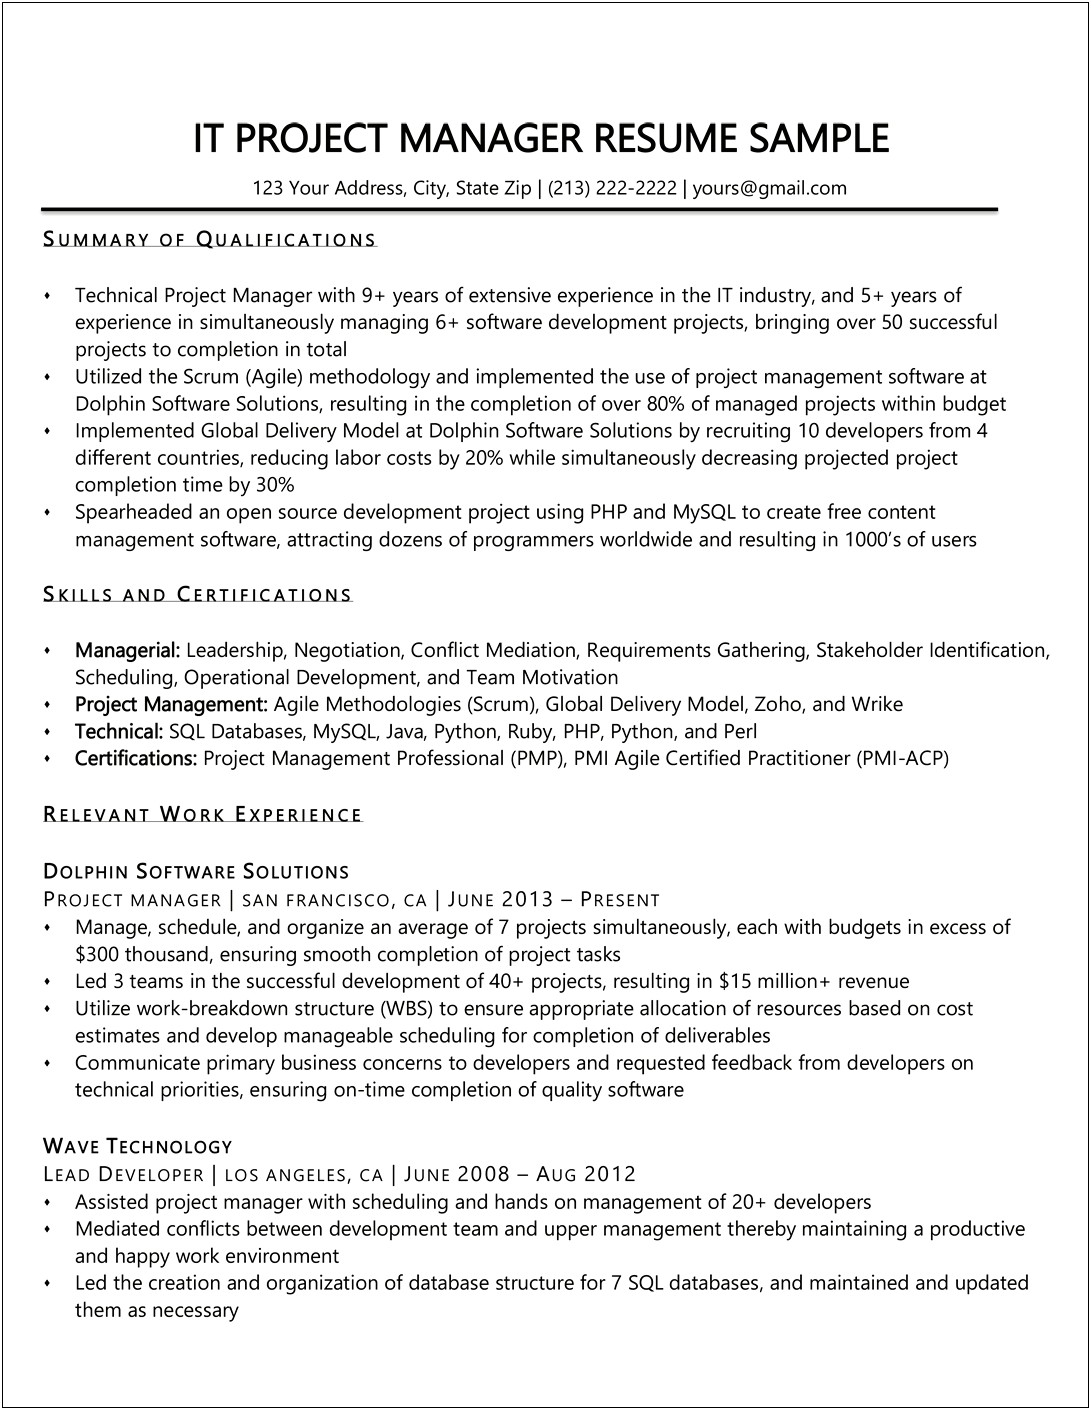 Project Management Summary Of Qualifications Resume